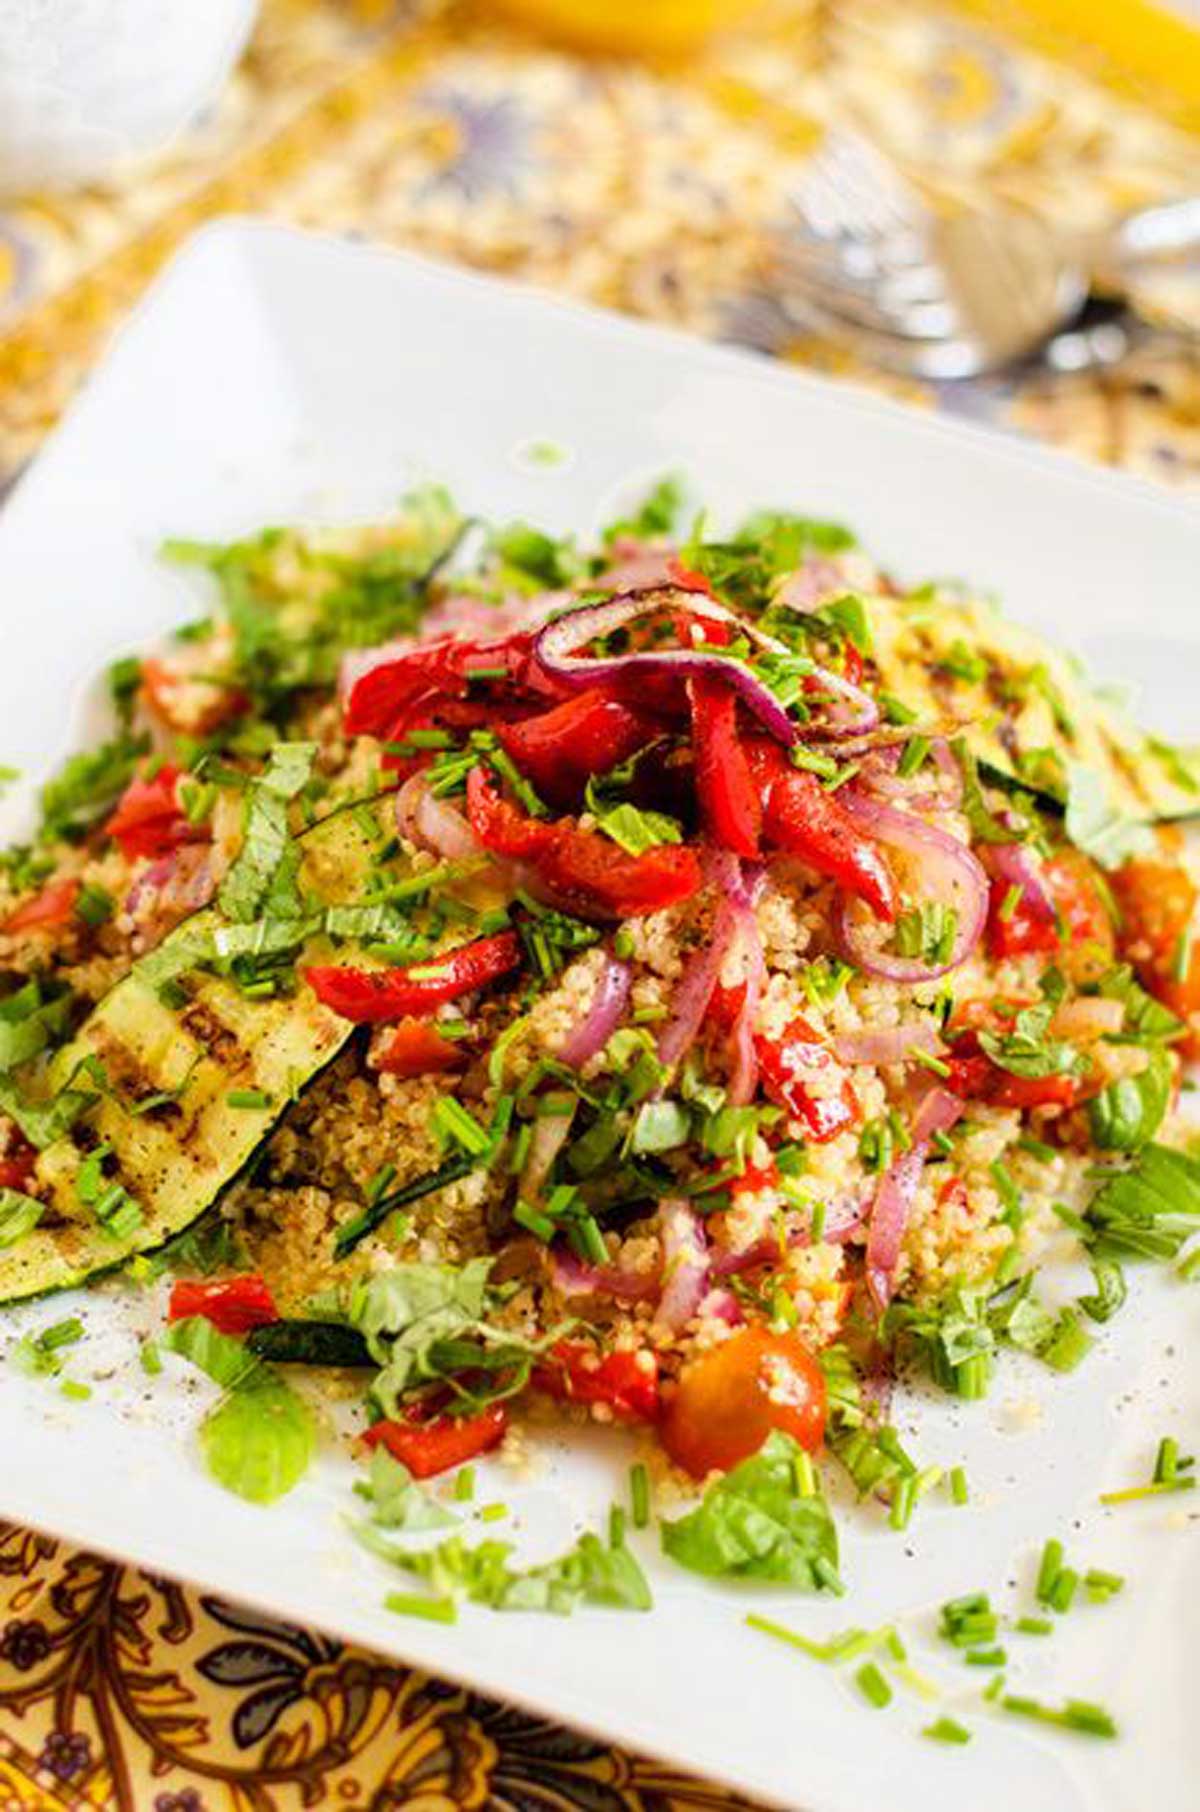 Photo of a white square plate with a vegetable quinoa salad garnished with fresh herbs.